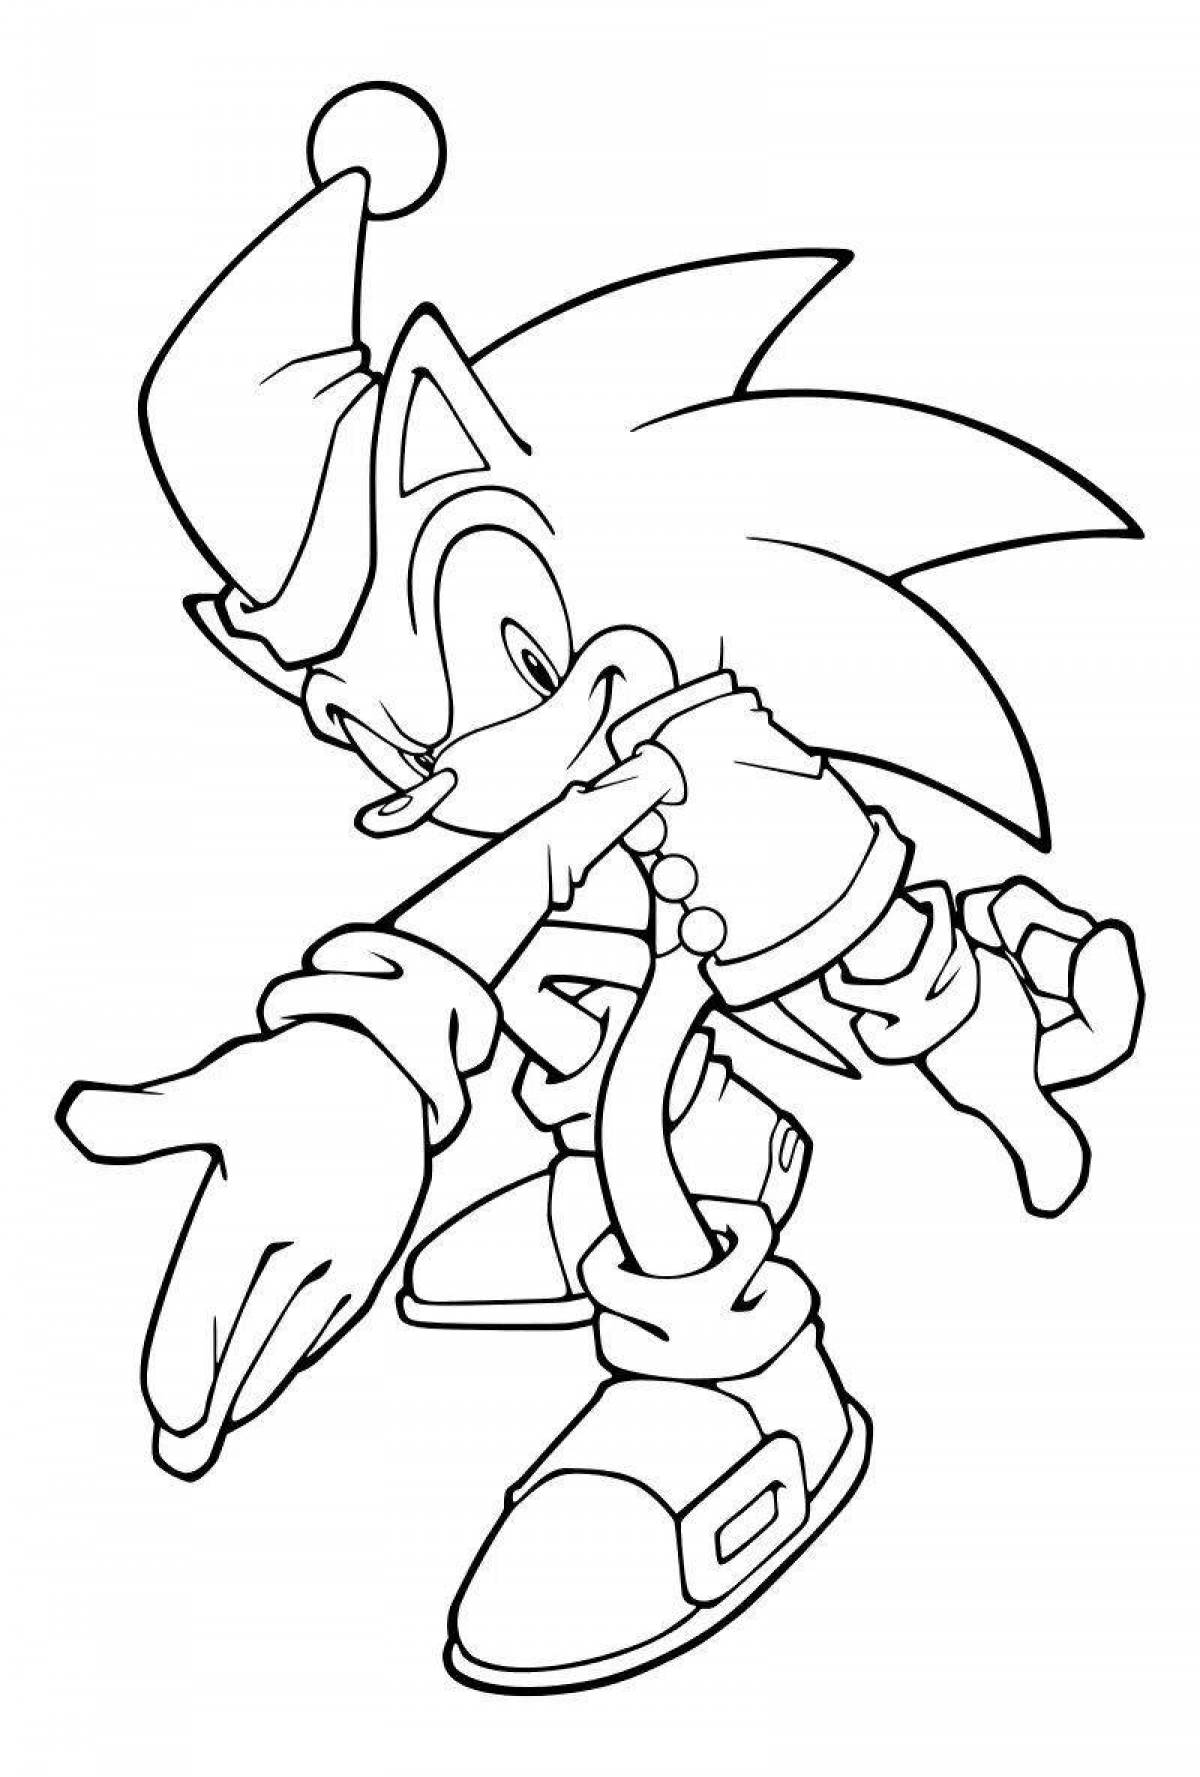 Charming xs sonic coloring page